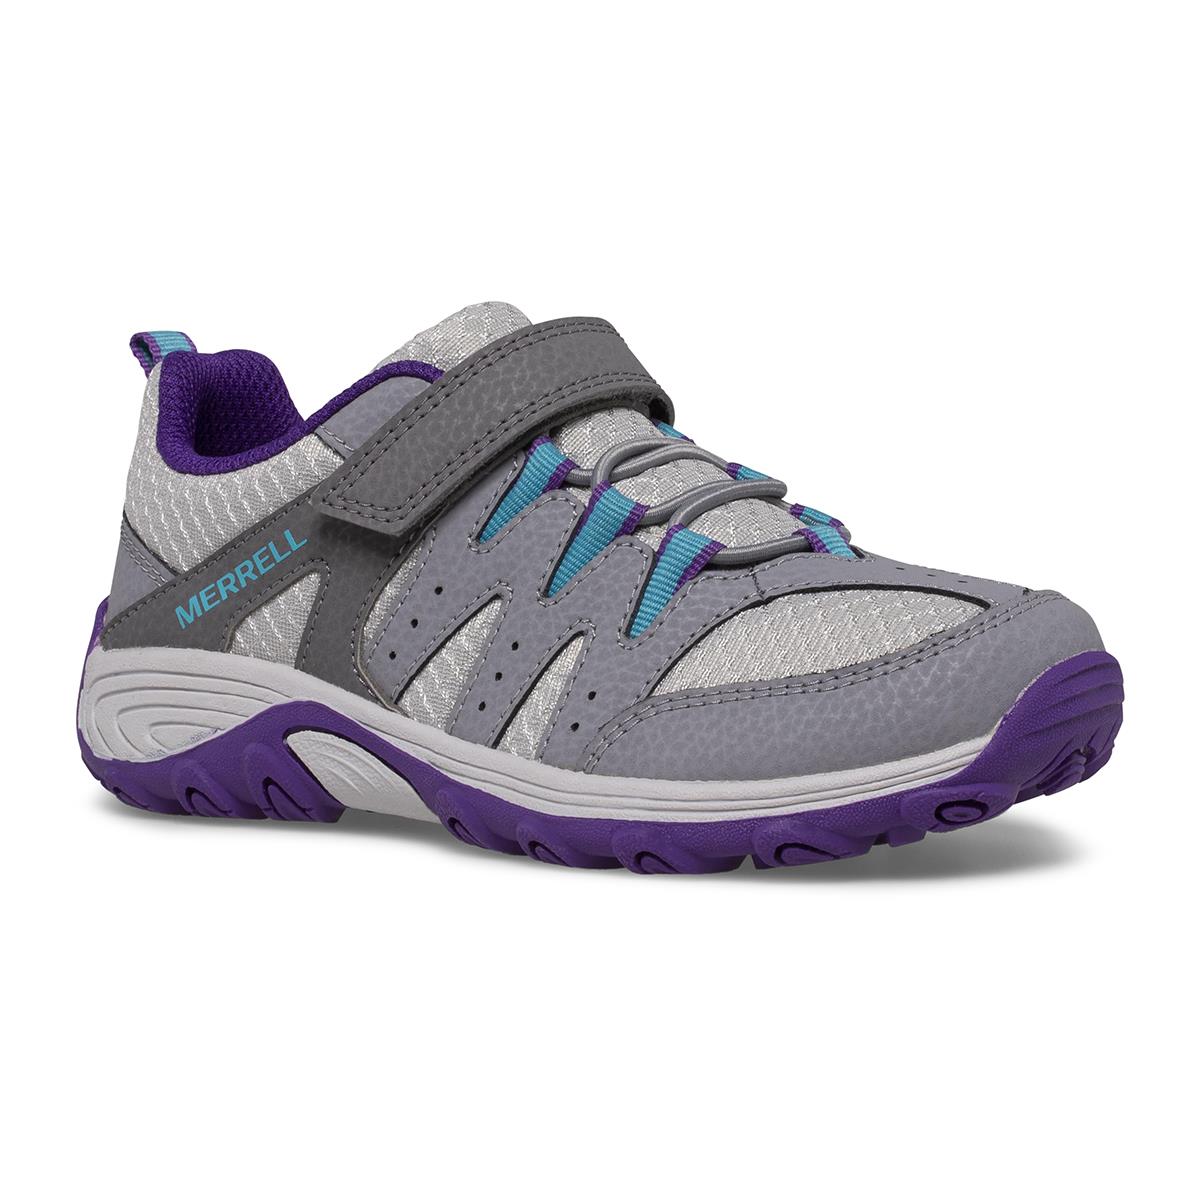 Merrell Kids Outback Low 2 Shoe | ruggednorth.ca